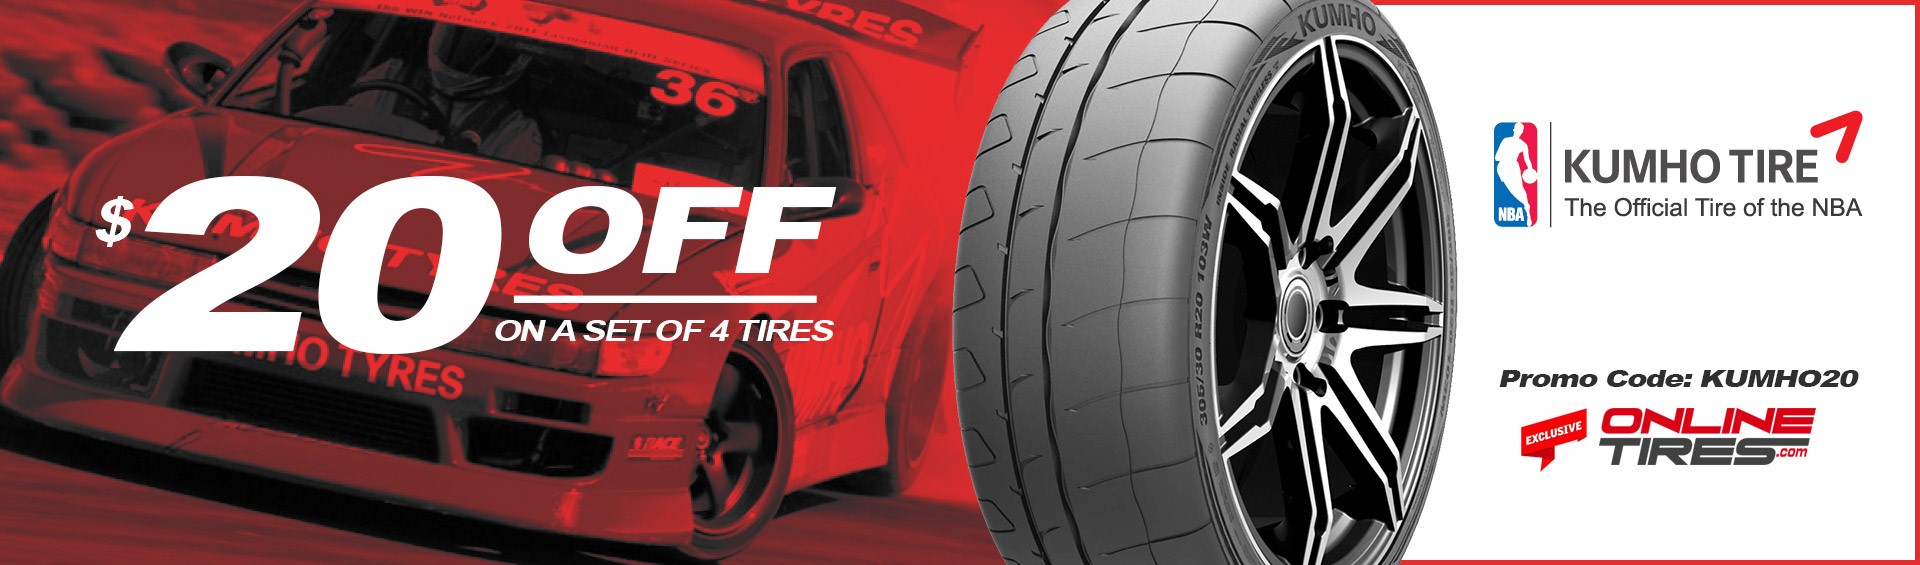 Kumho Tires $20 OFF on a set of 4!